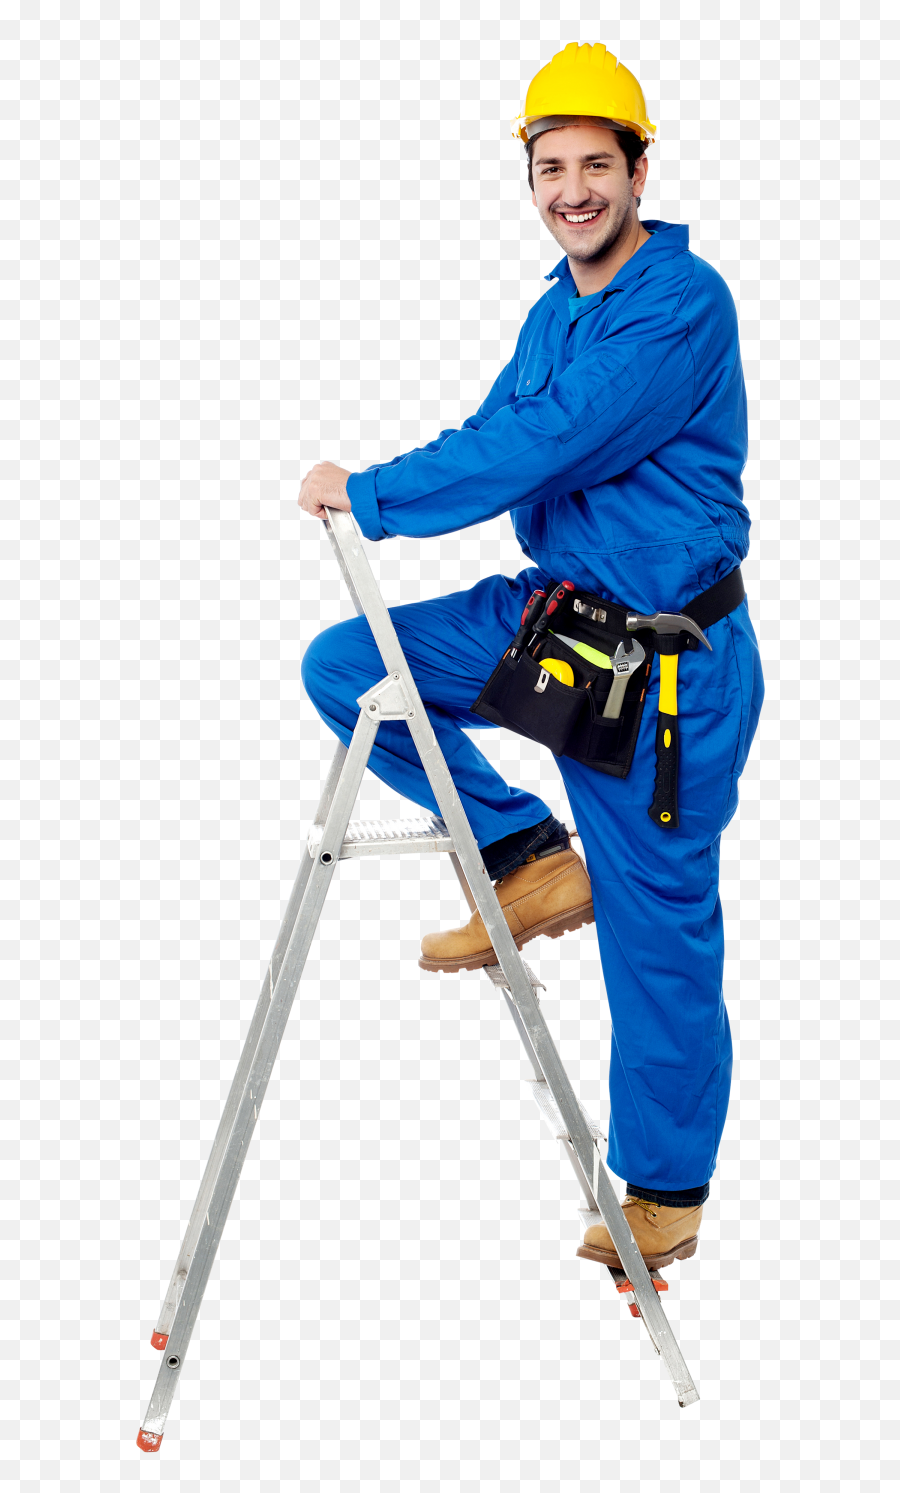 Architects - Plumber Climbing A Ladder,Work Png